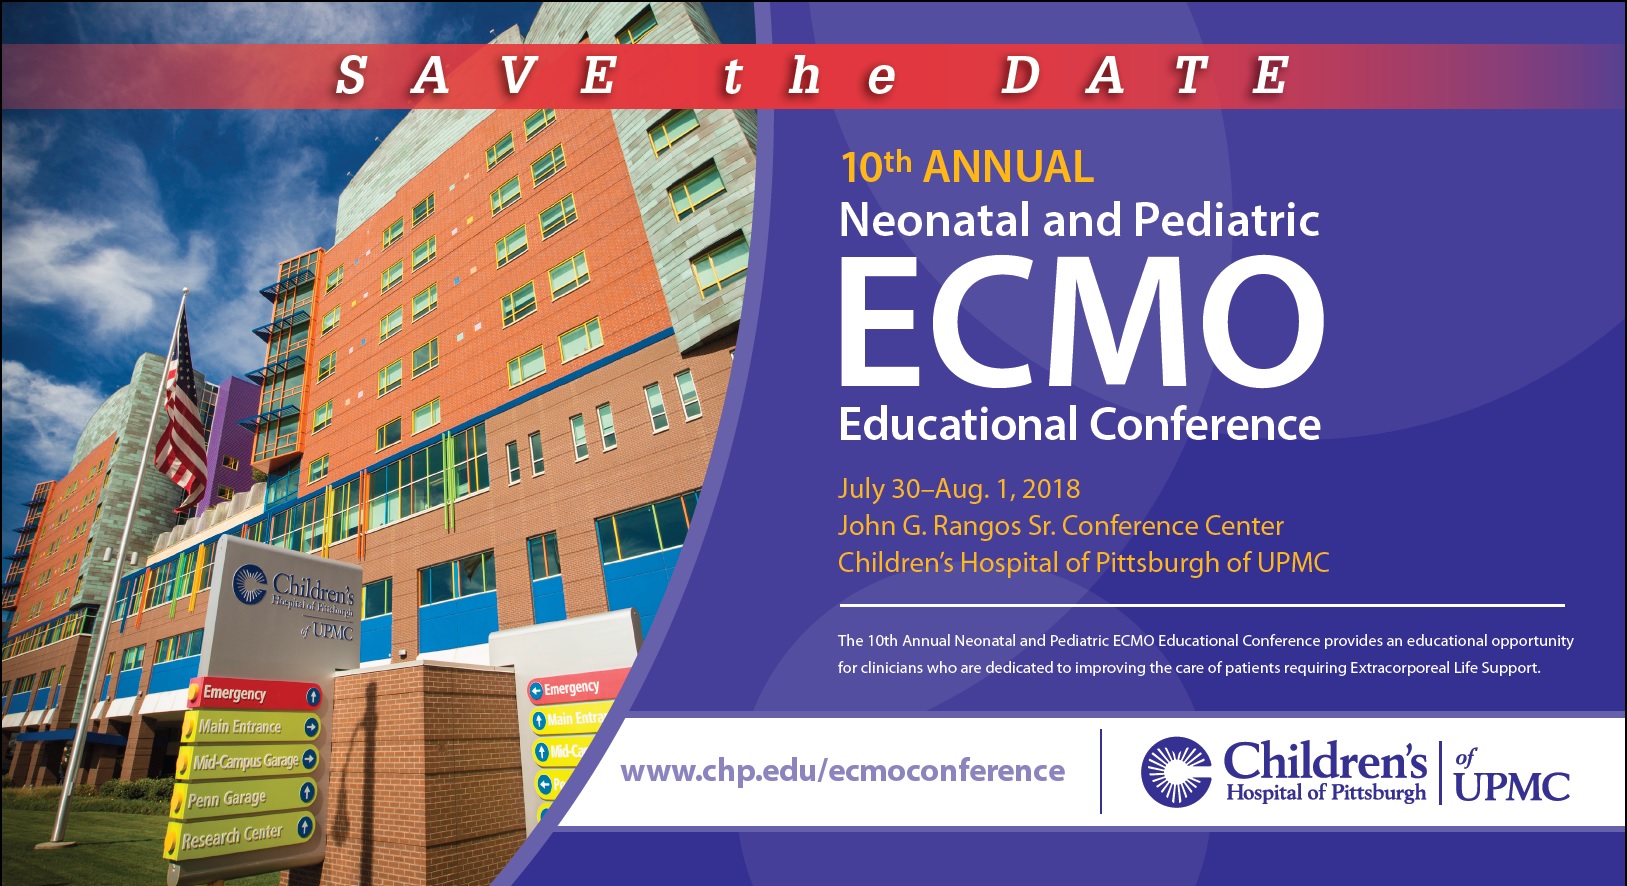 10th Annual Neonatal and Pediatric ECMO Educational Conference